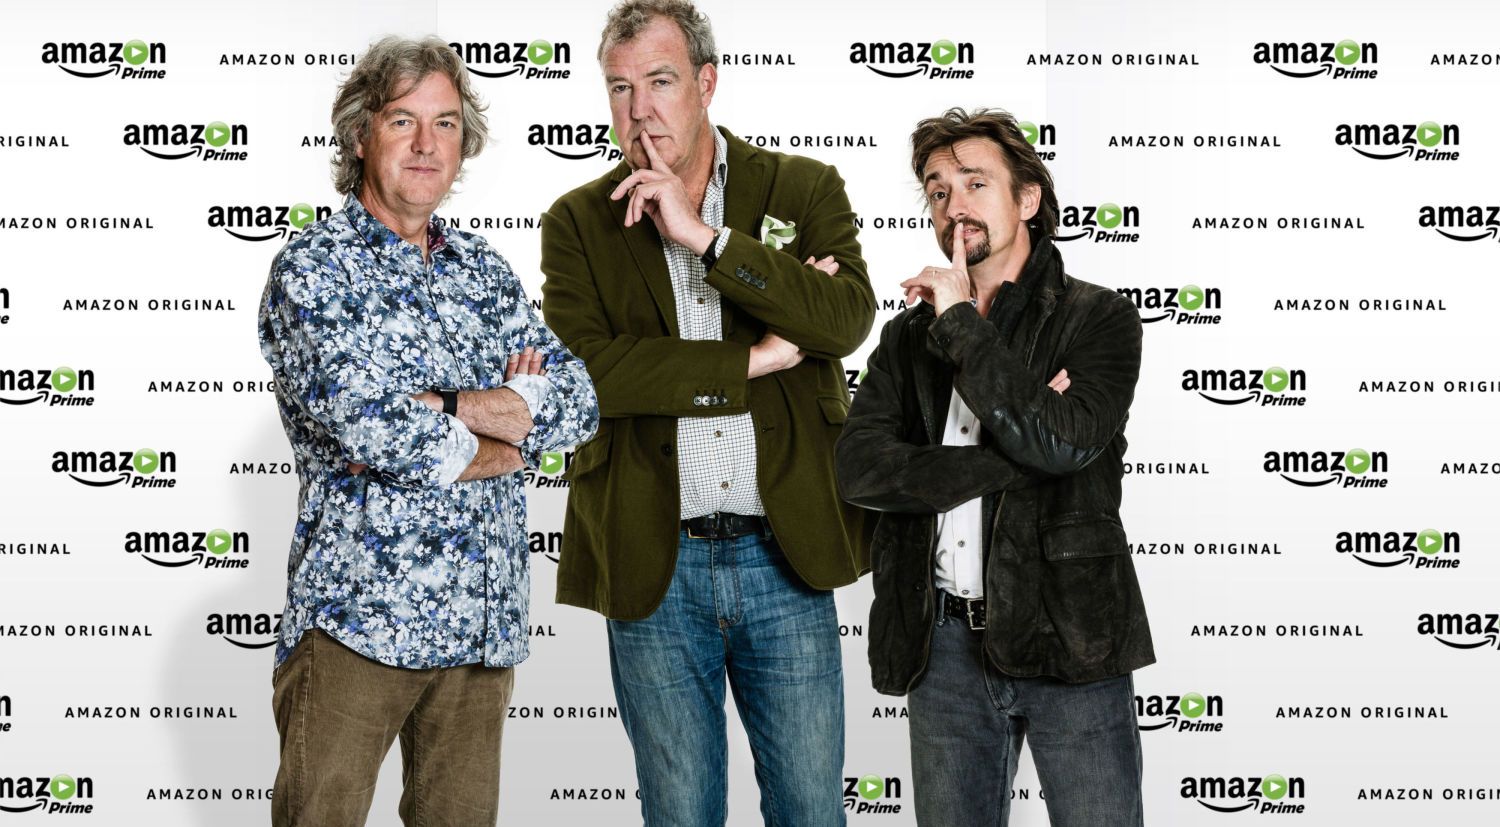 Welcome to your new Top Gear presenters!